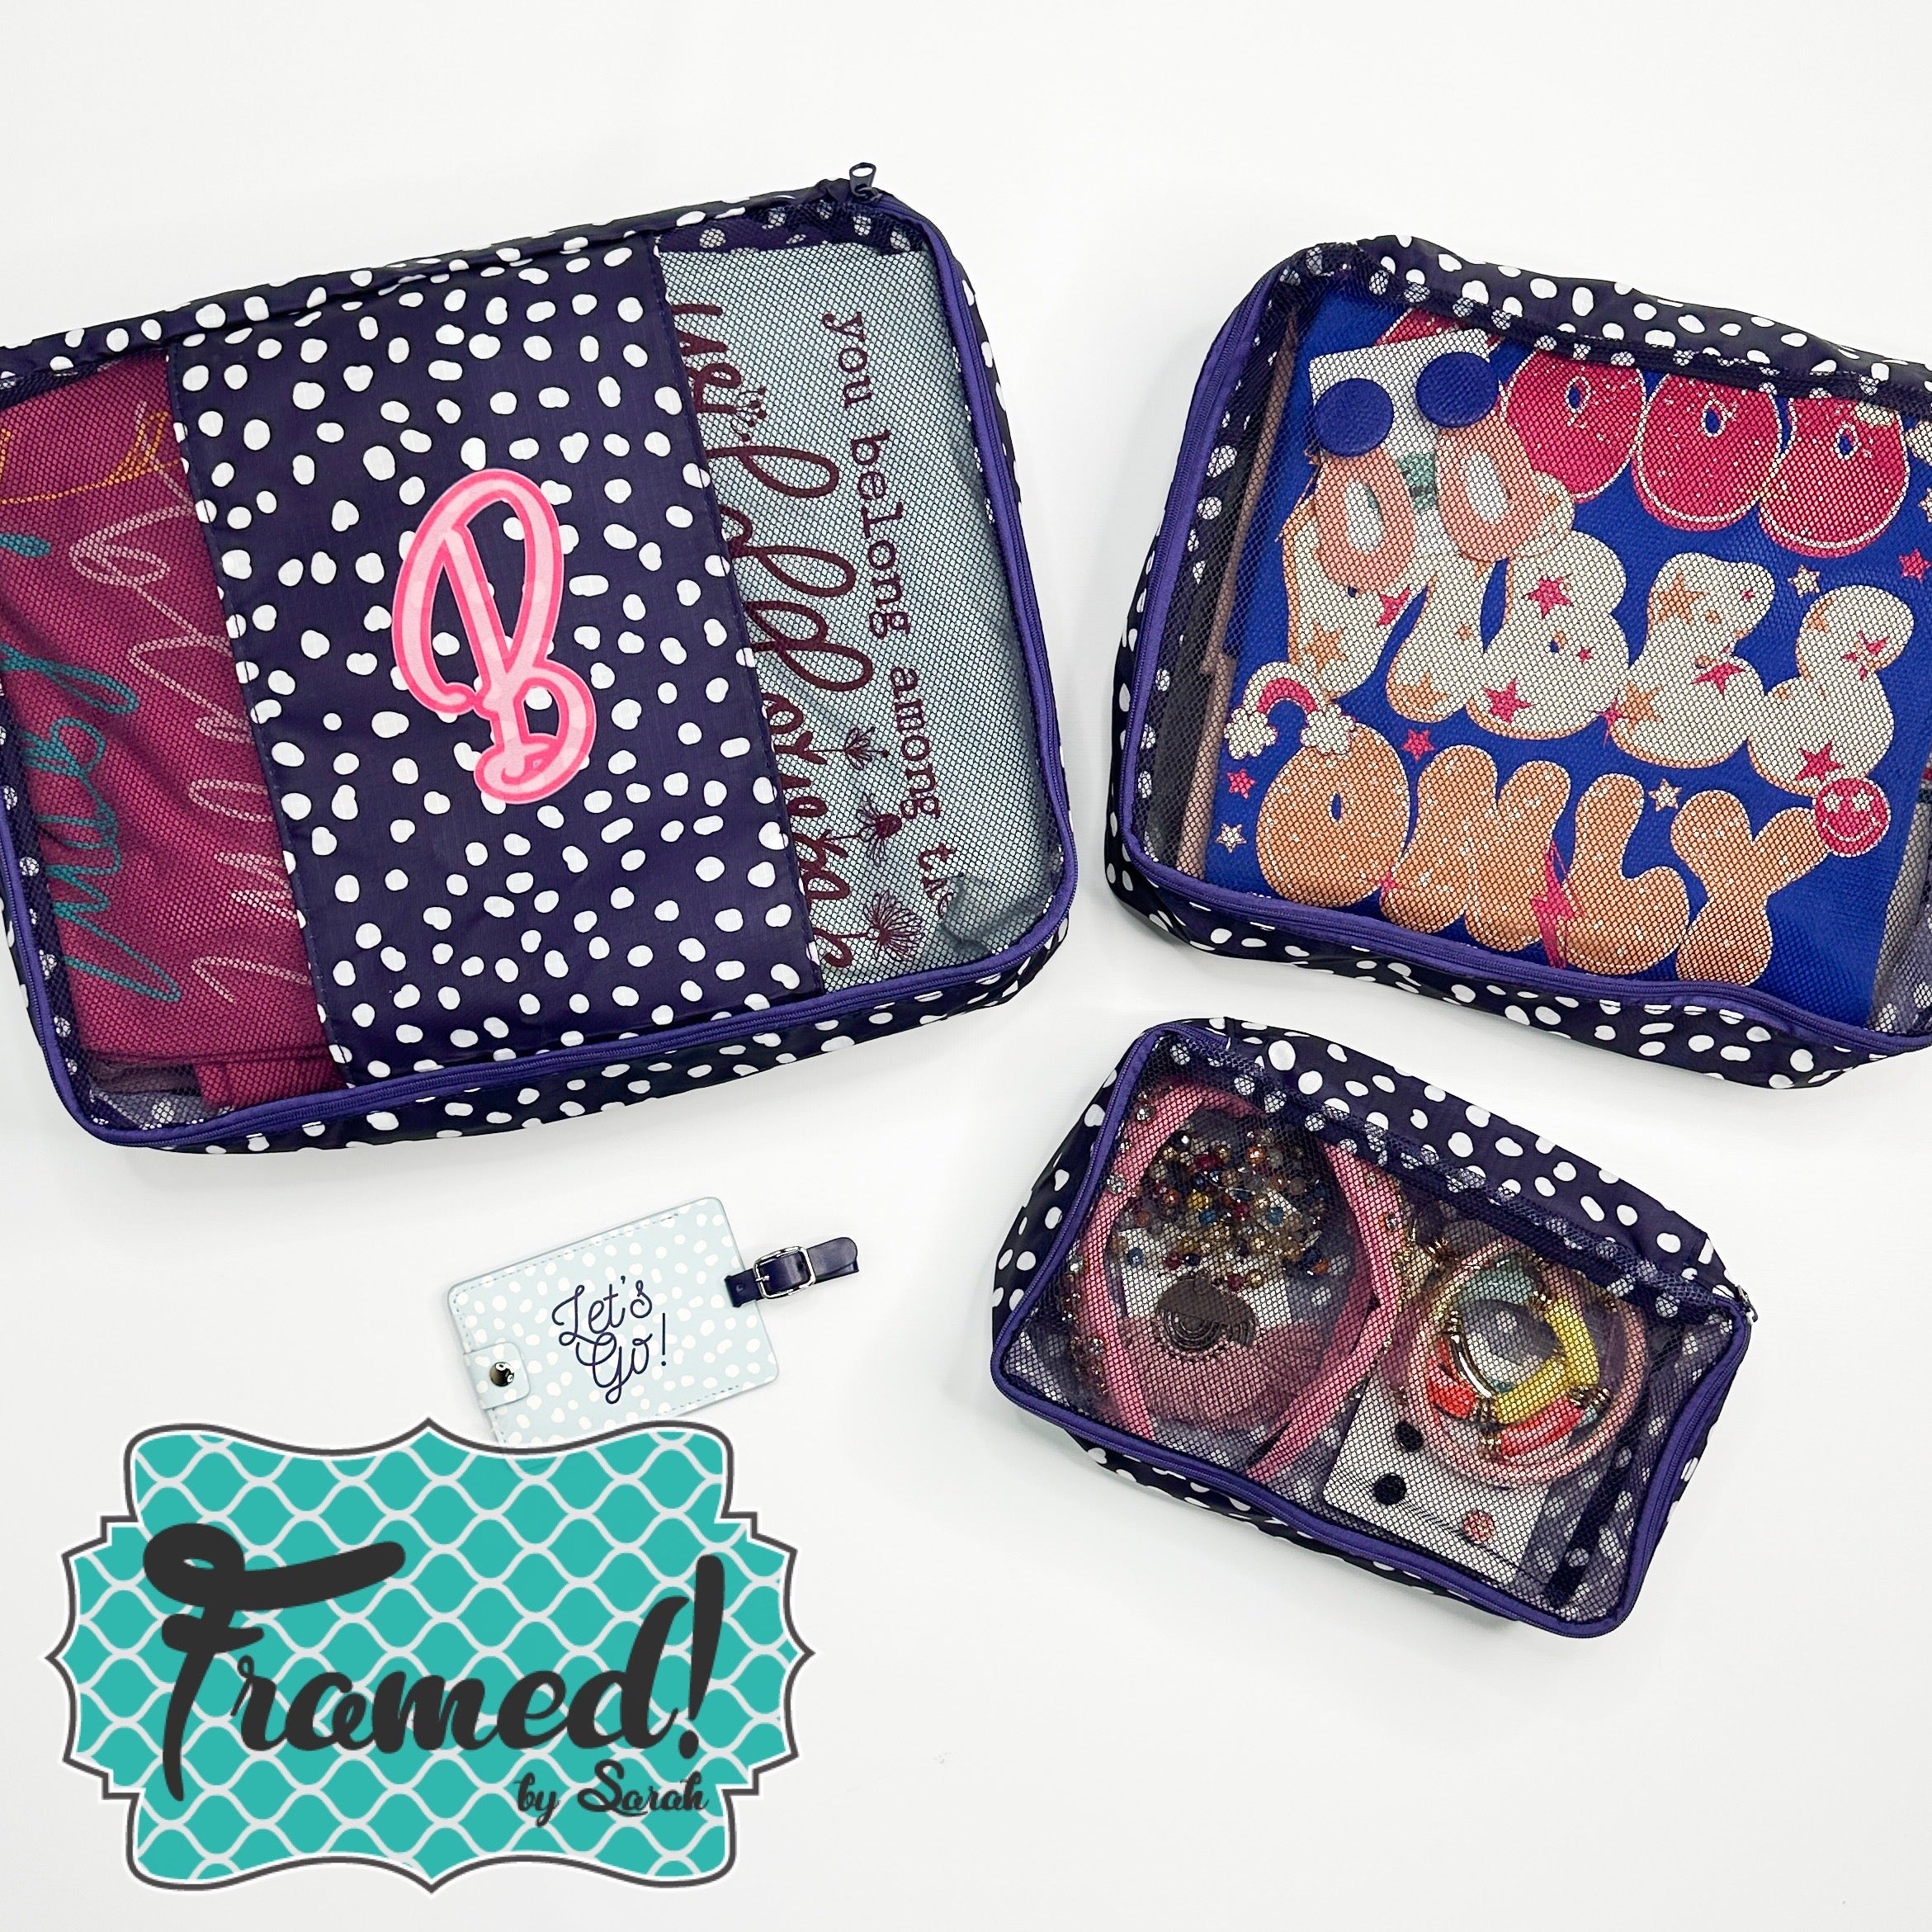 Set of 3 Printed Packing Cubes